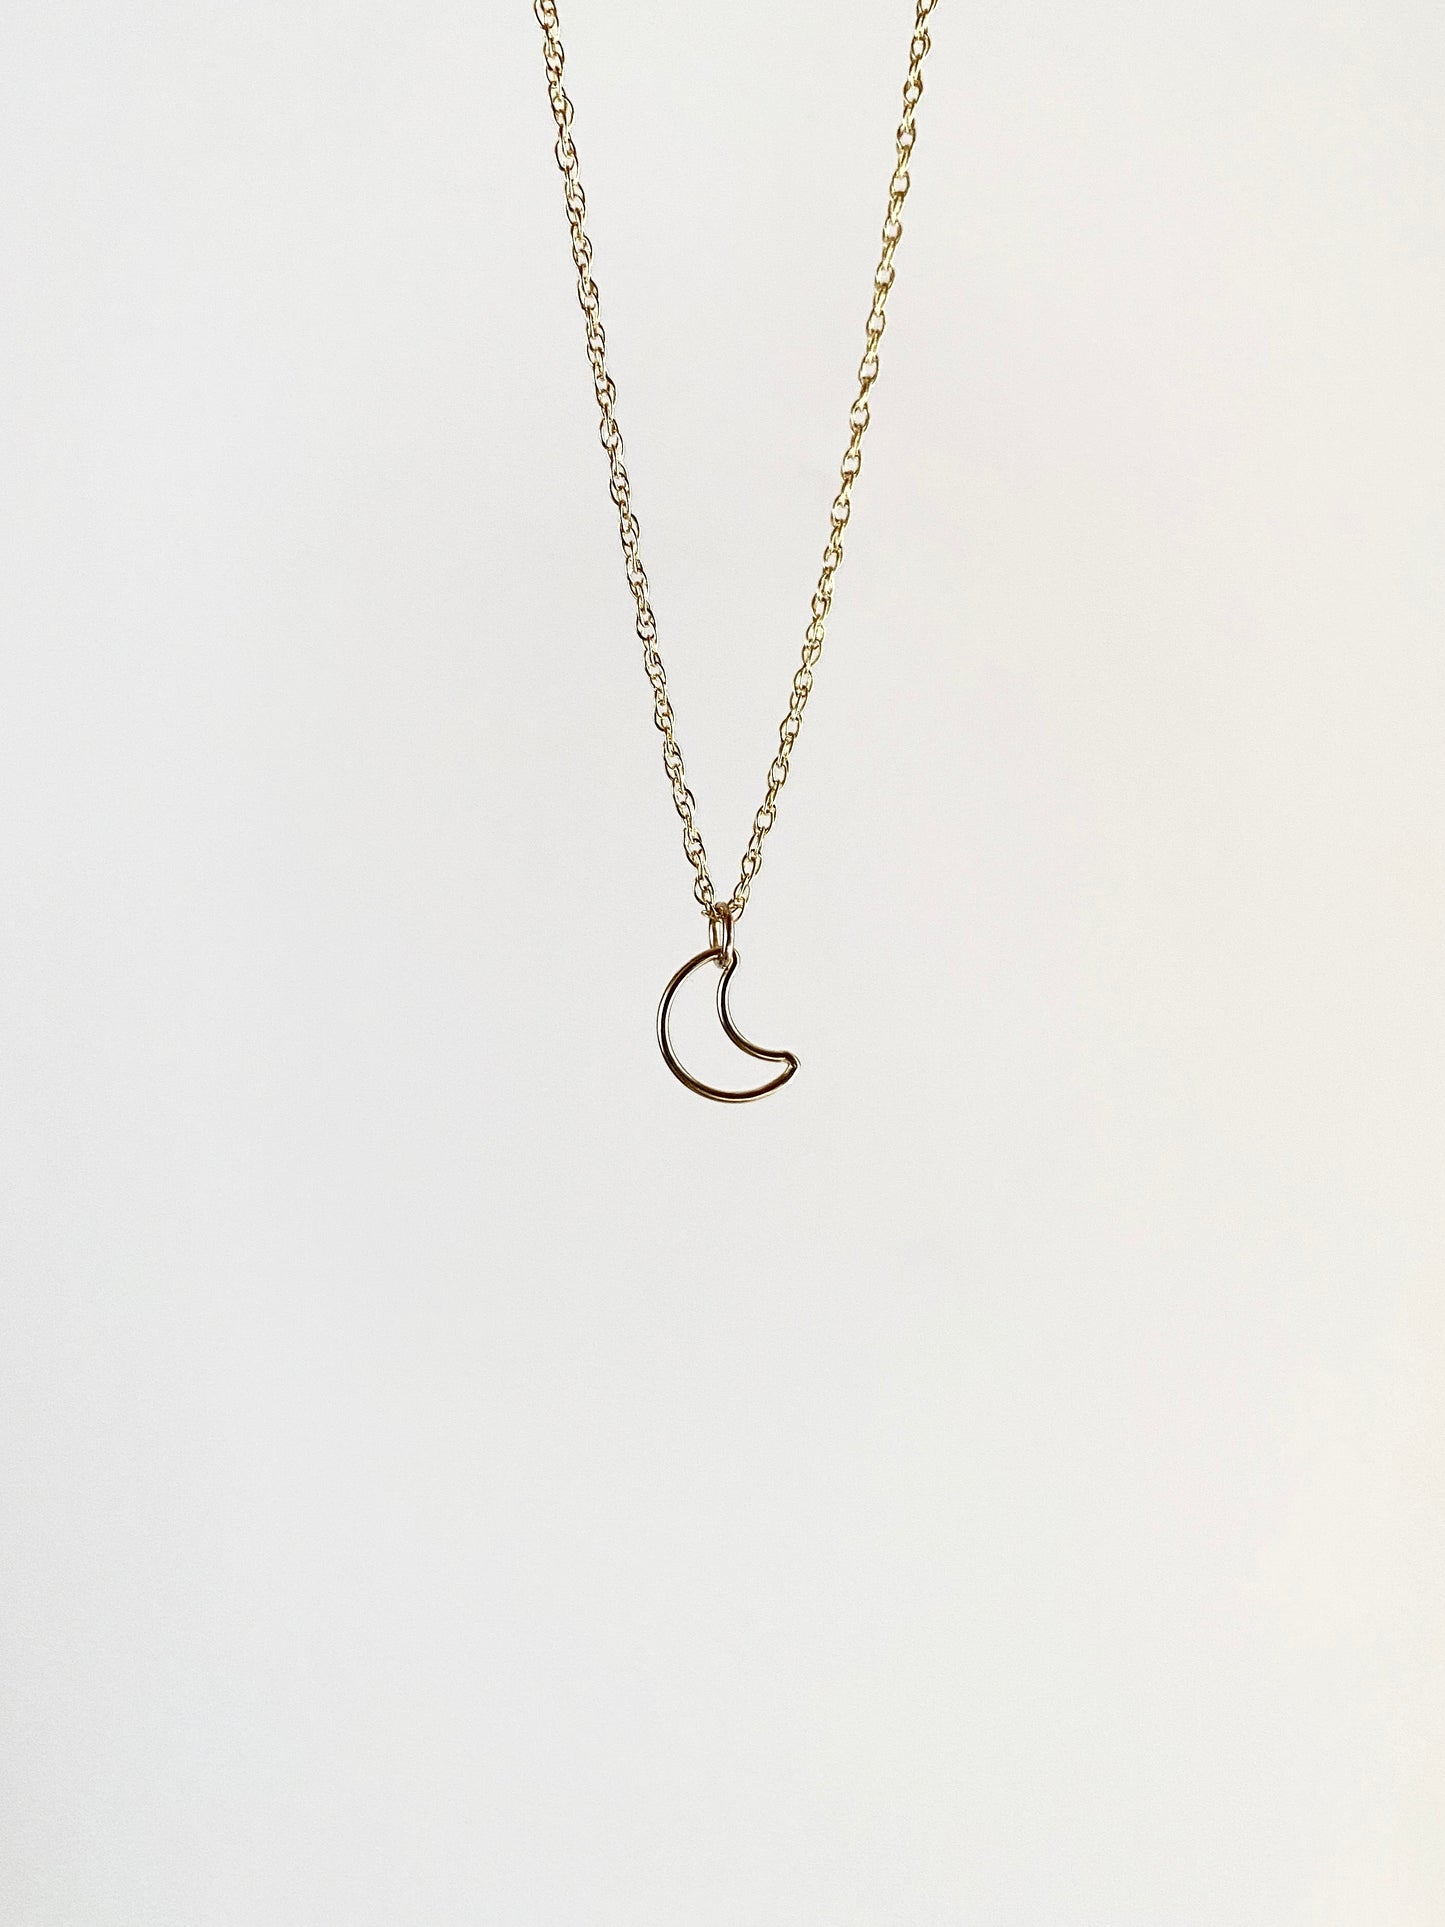 Crescent Moon Charm Necklace ~ 14K Yellow Gold Fill